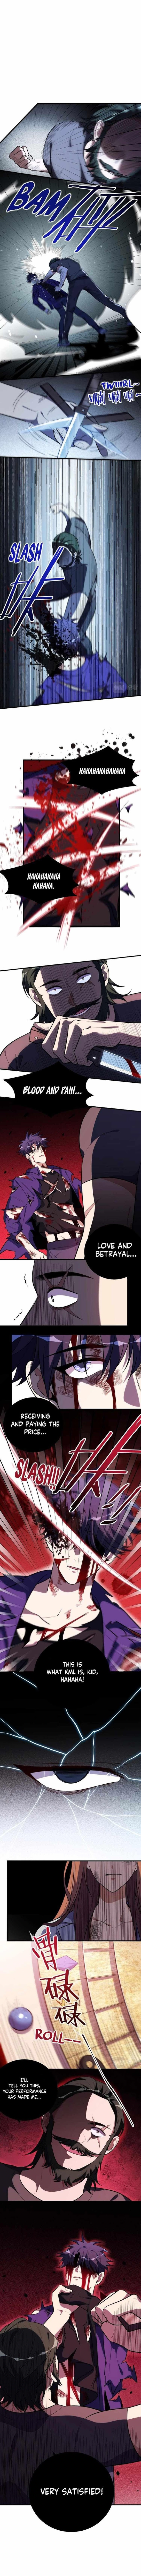 Killing My Love - Page 2